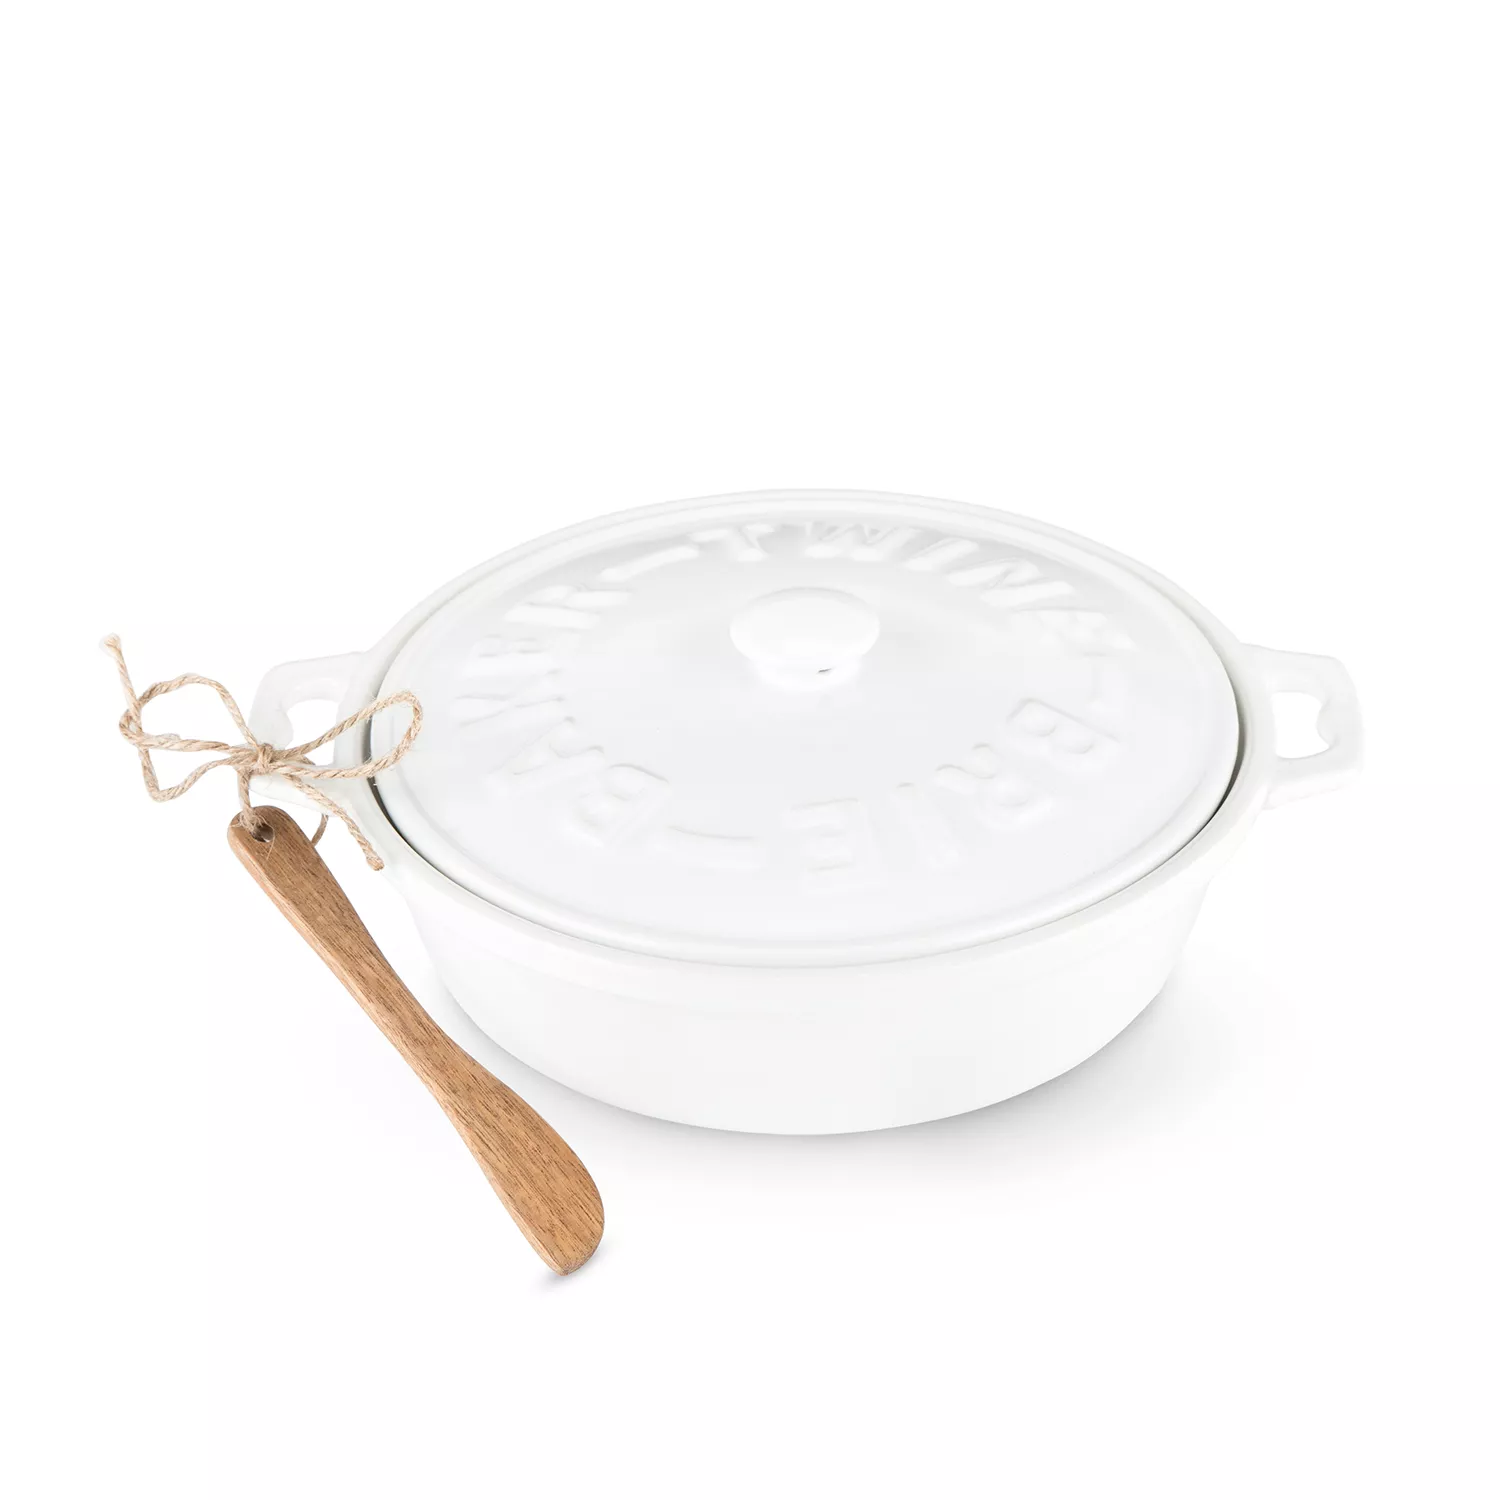 Twine Living Co. Brie Baker with Acacia Spreader